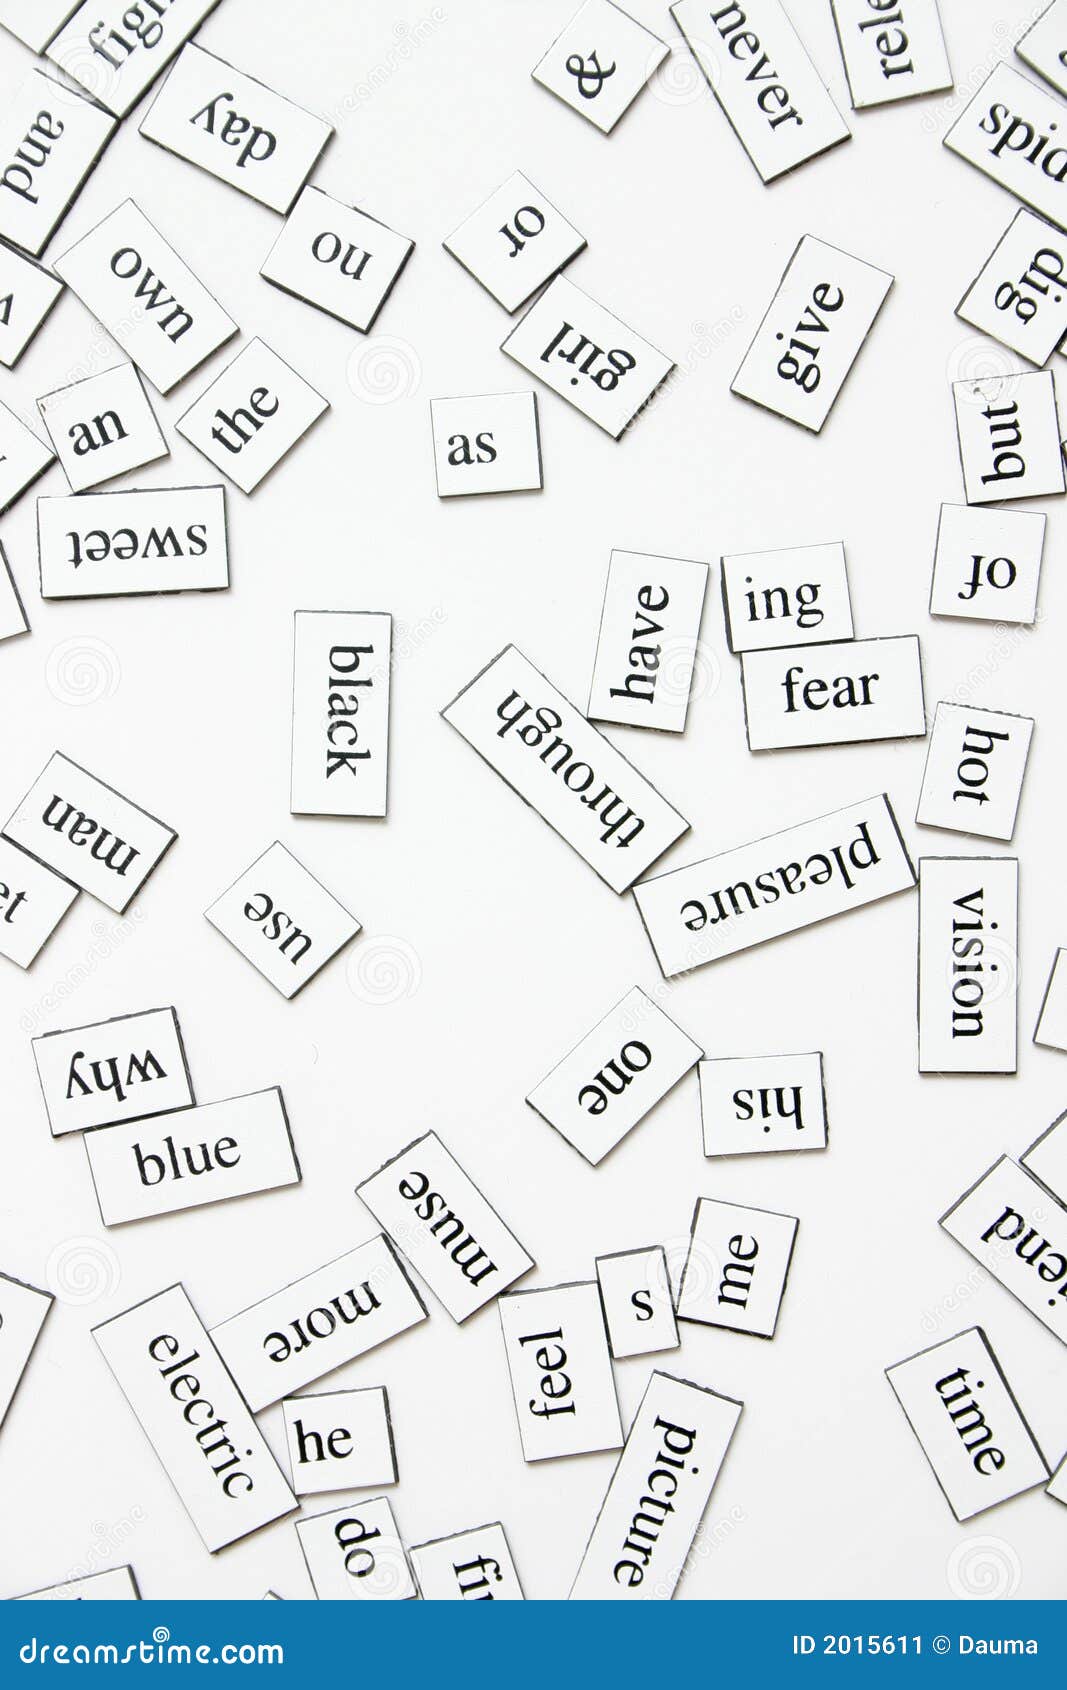 Messy Words Stock Image - Image: 2015611
